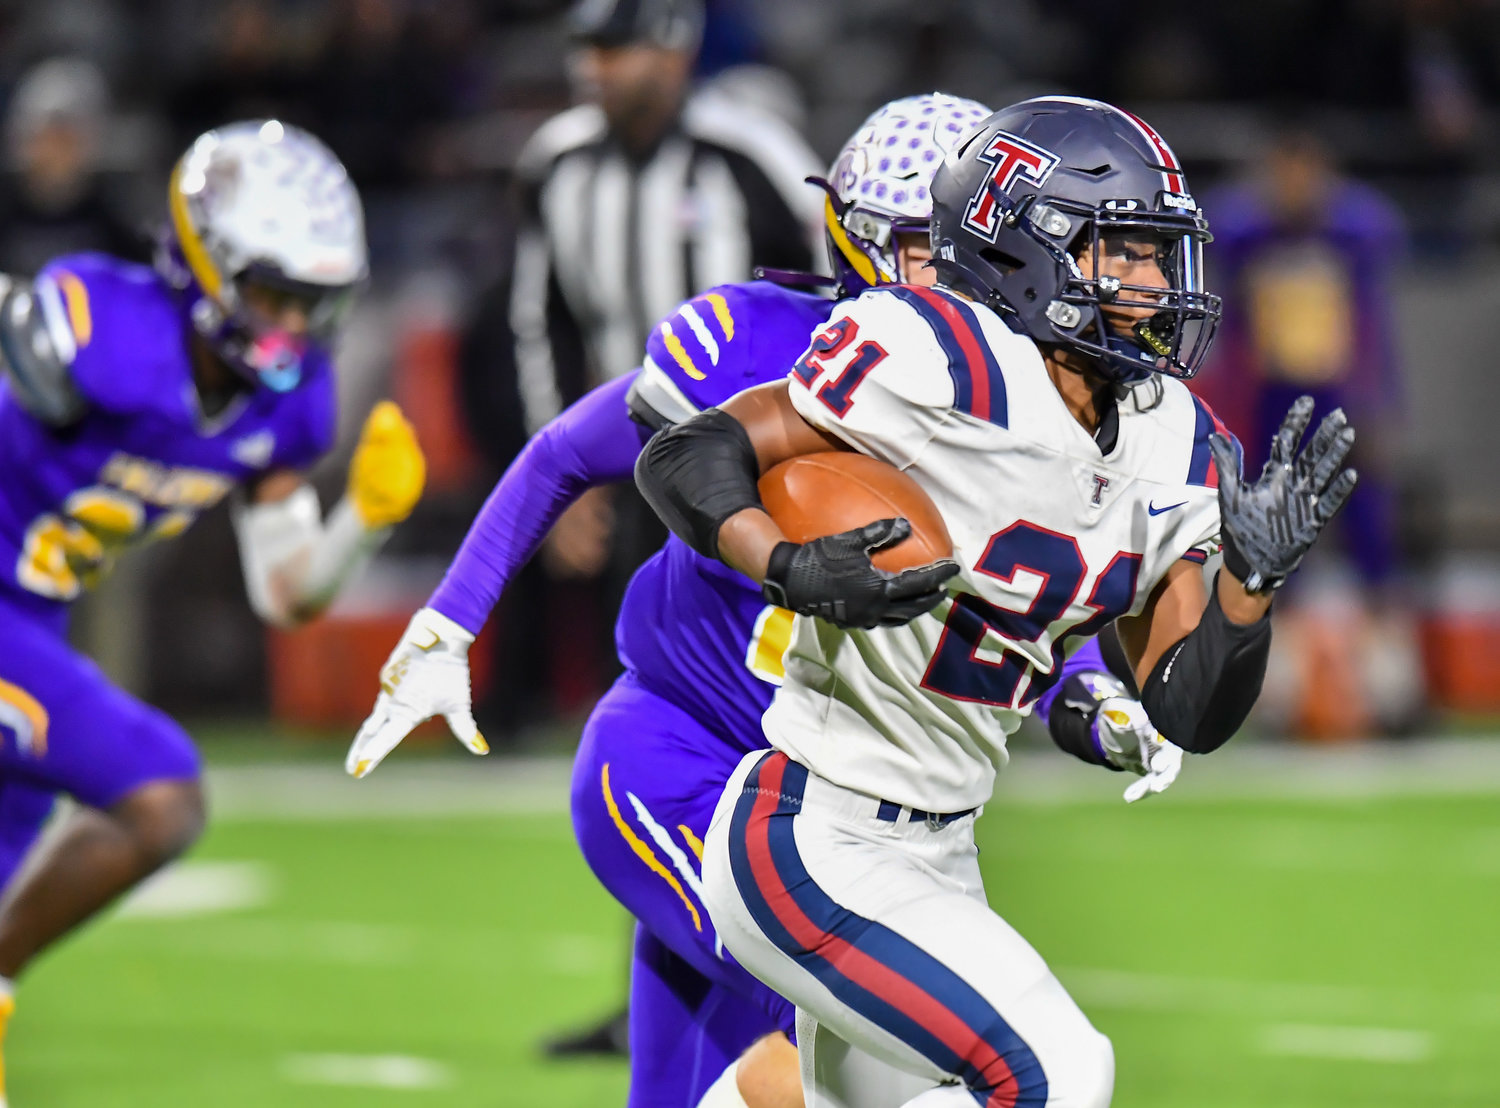 Houston Tx. Nov 19, 2021:  Tompkins #21 Caleb Blocker rushes to the outside for a first down during the UIL area playoff game between Tompkins and Jersey Village at Pridgeon Stadium in Houston. (Photo by Mark Goodman / Katy Times)